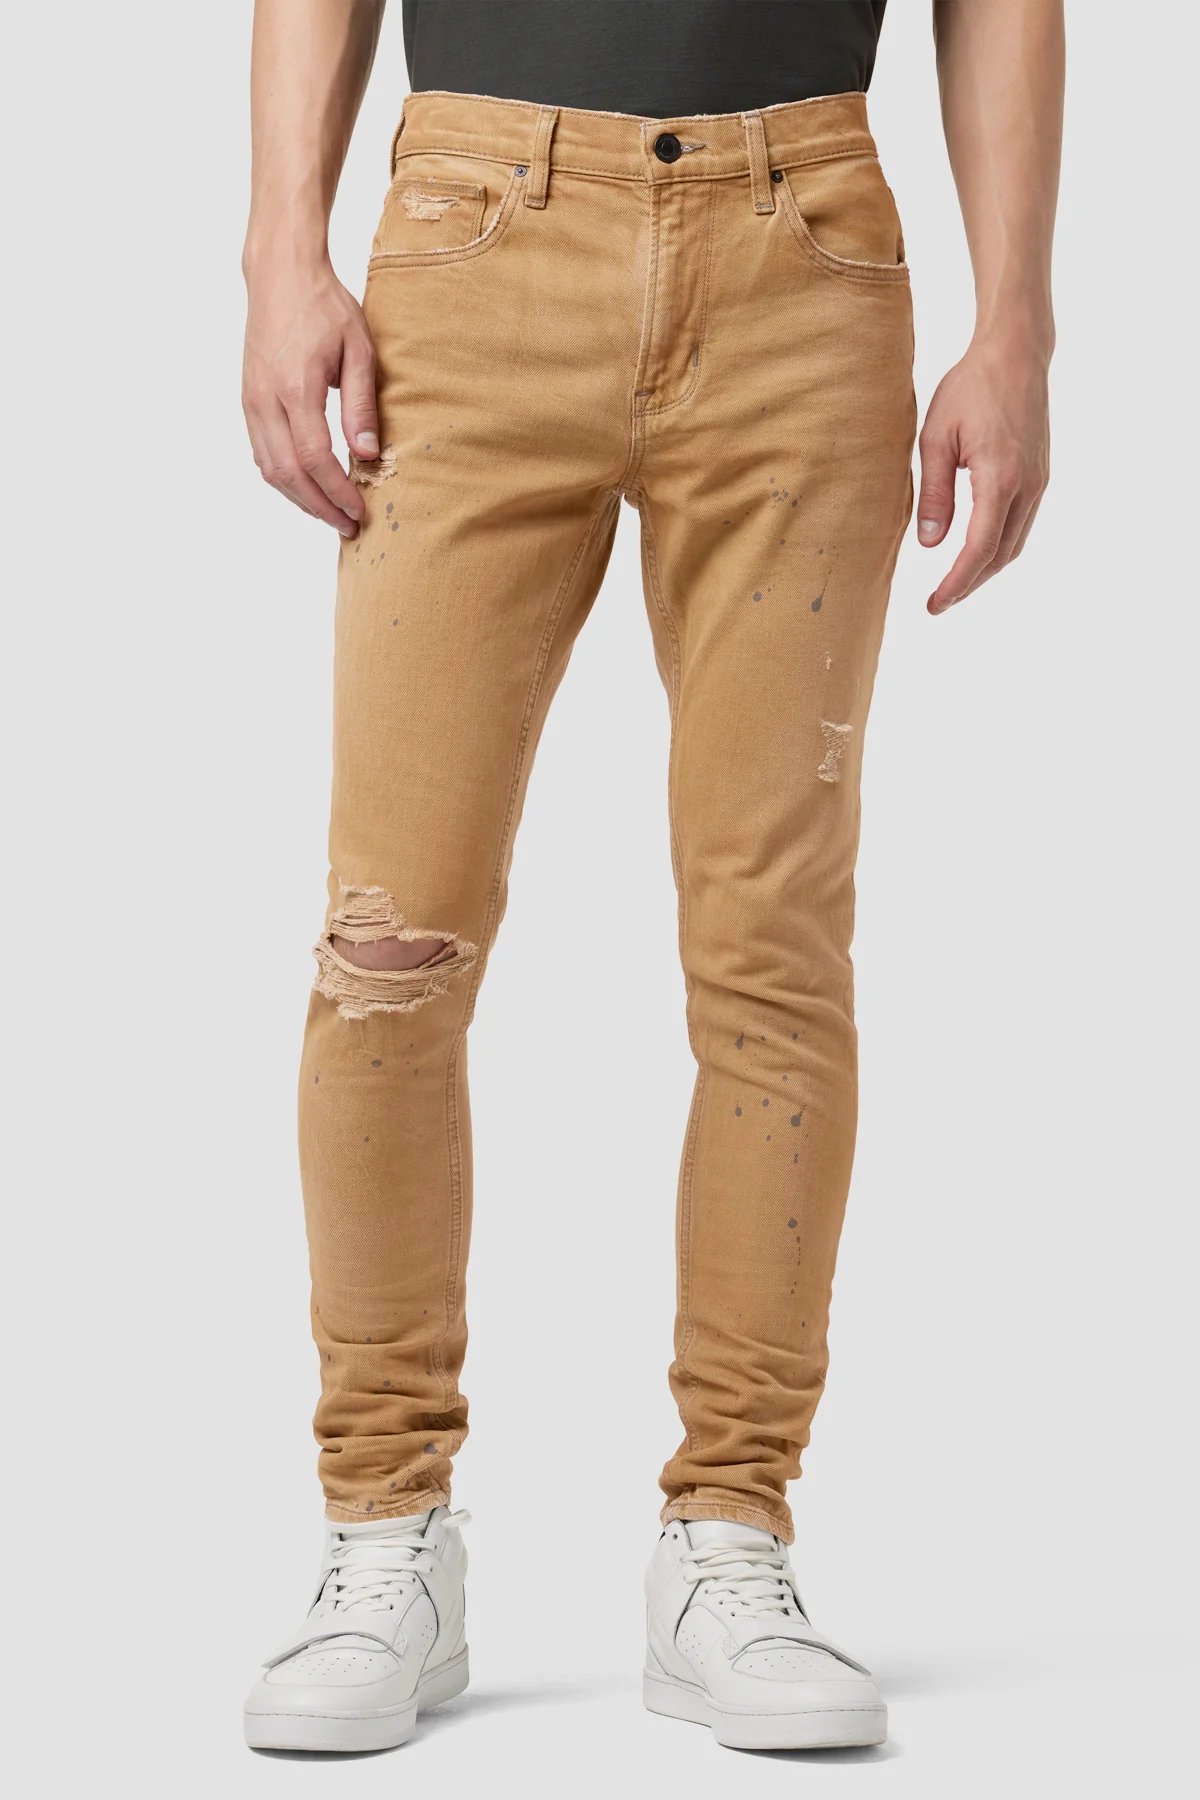 nyt år lokalisere solid Hudson Jeans Stained Rust Zack Skinny Jeans - Stained Rust | Verishop